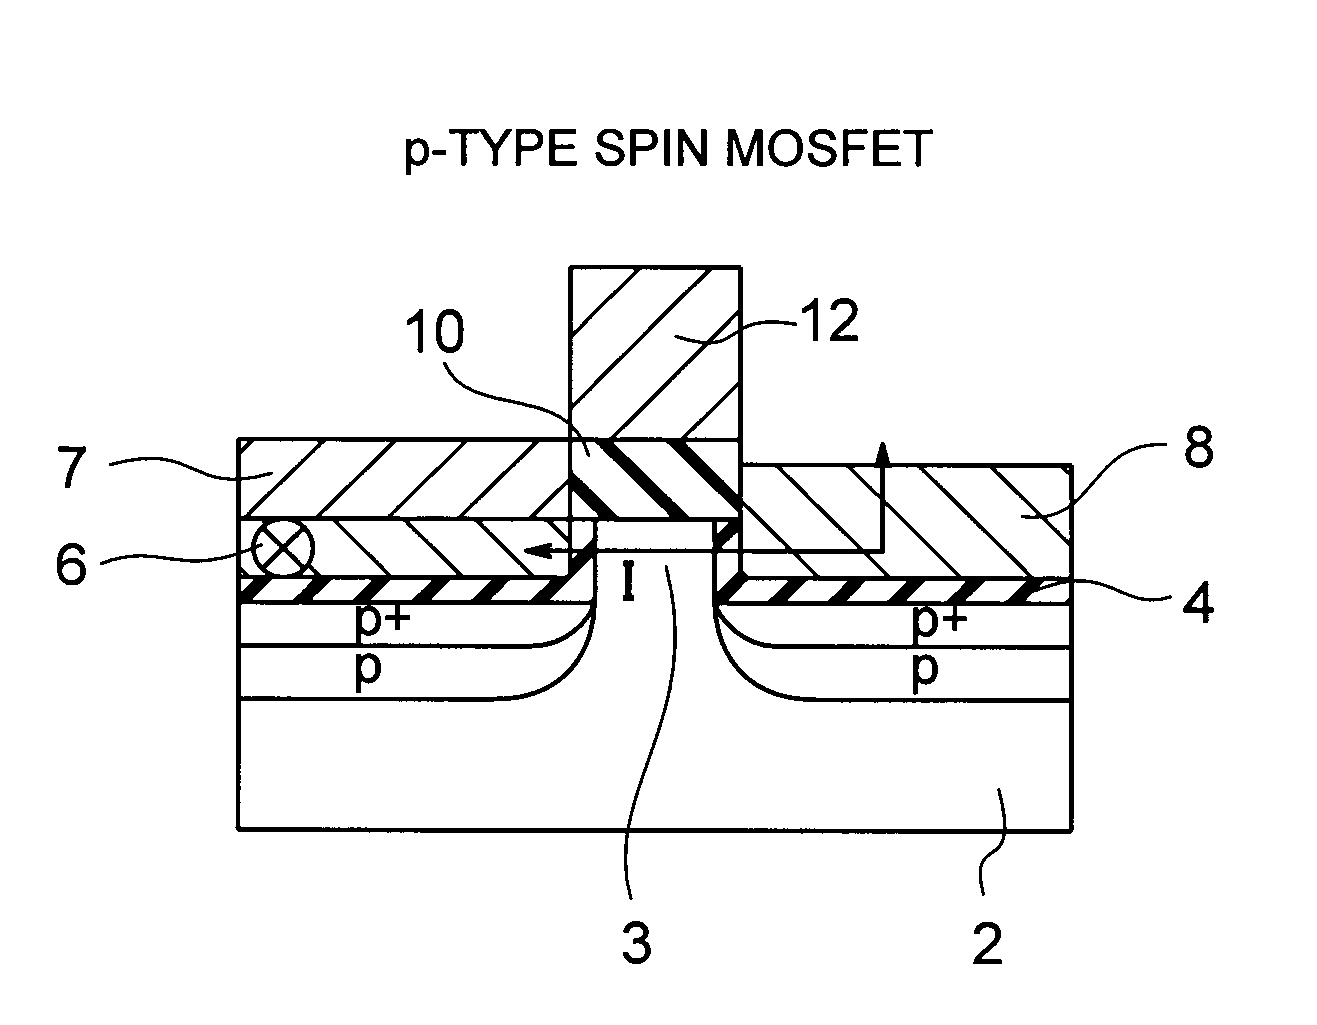 Spin mosfet